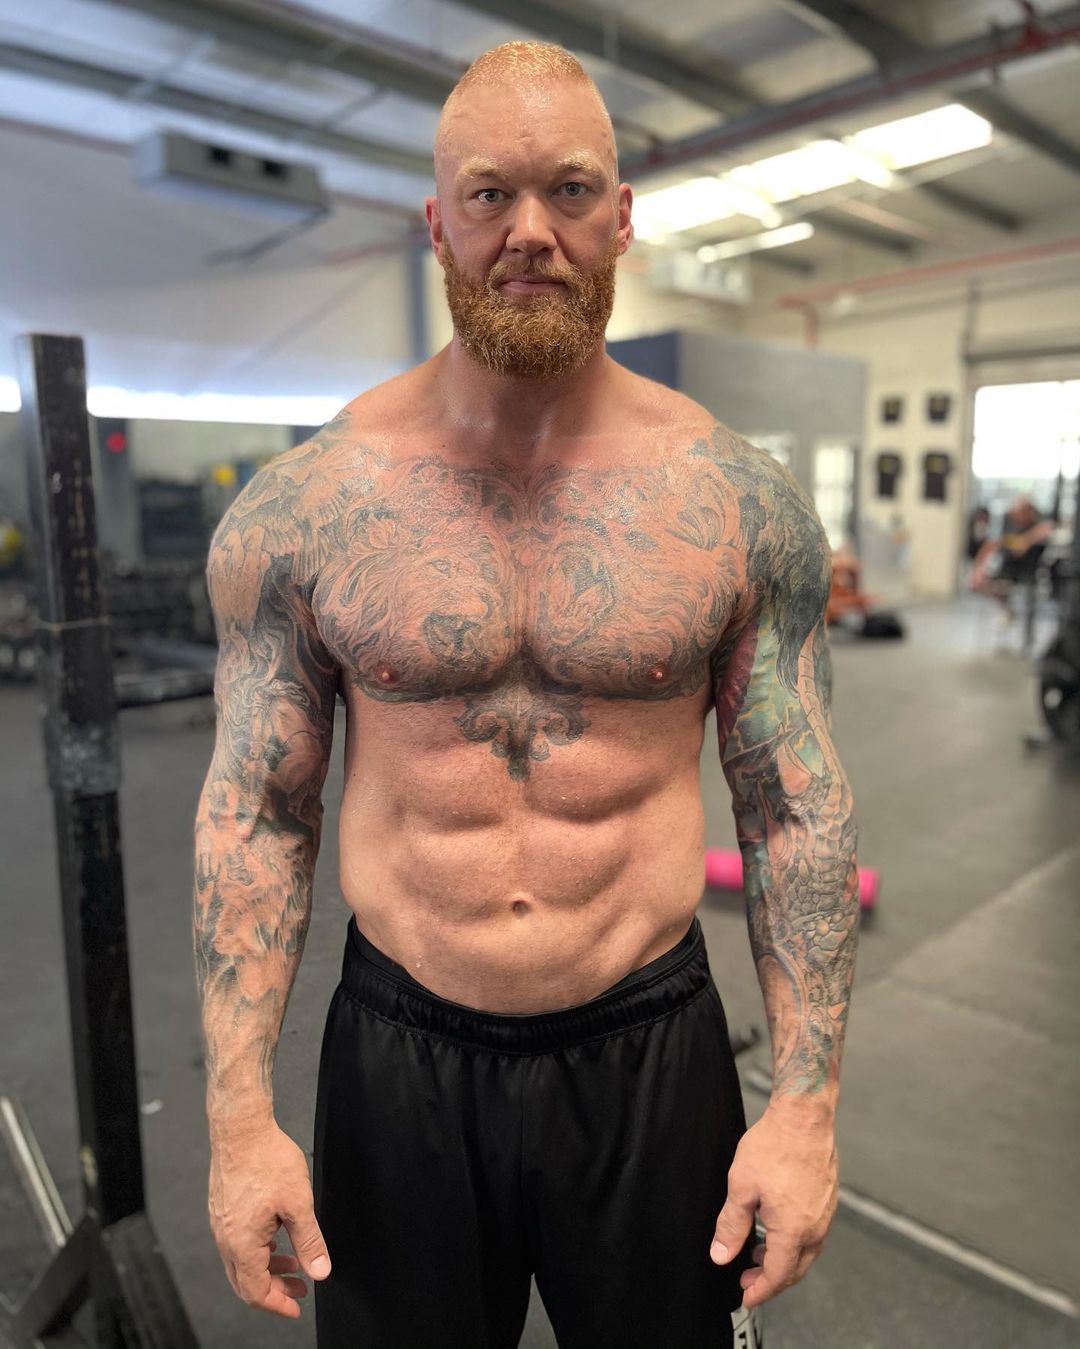 Game of Thrones' the Mountain Actor Reveals Body Transformation